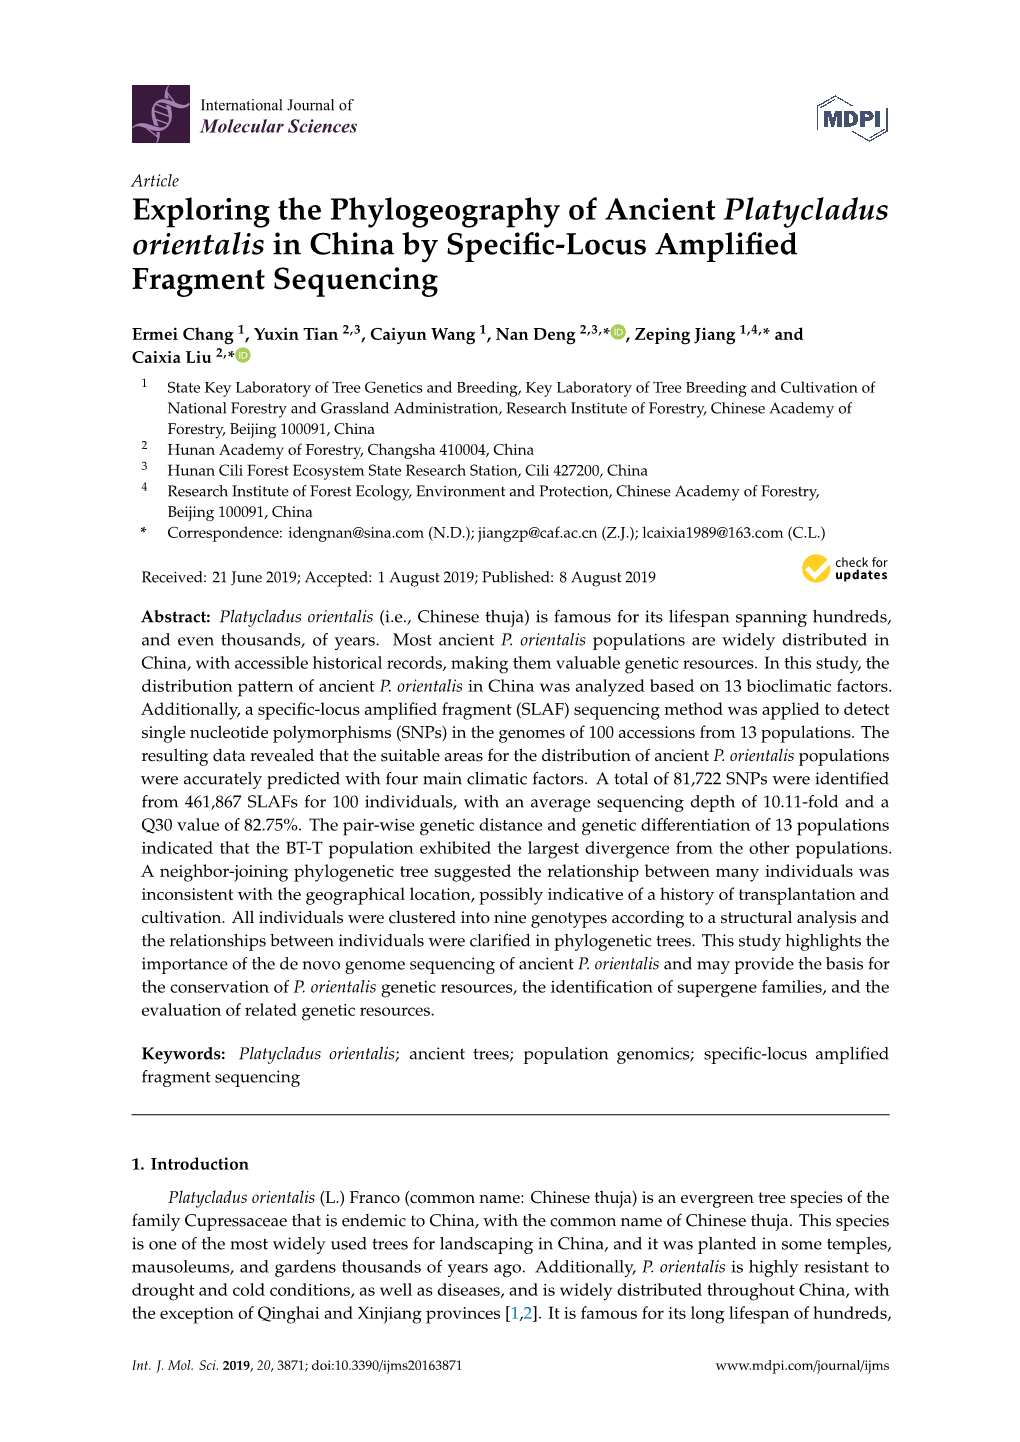 Exploring the Phylogeography of Ancient Platycladus Orientalis in China by Speciﬁc-Locus Ampliﬁed Fragment Sequencing